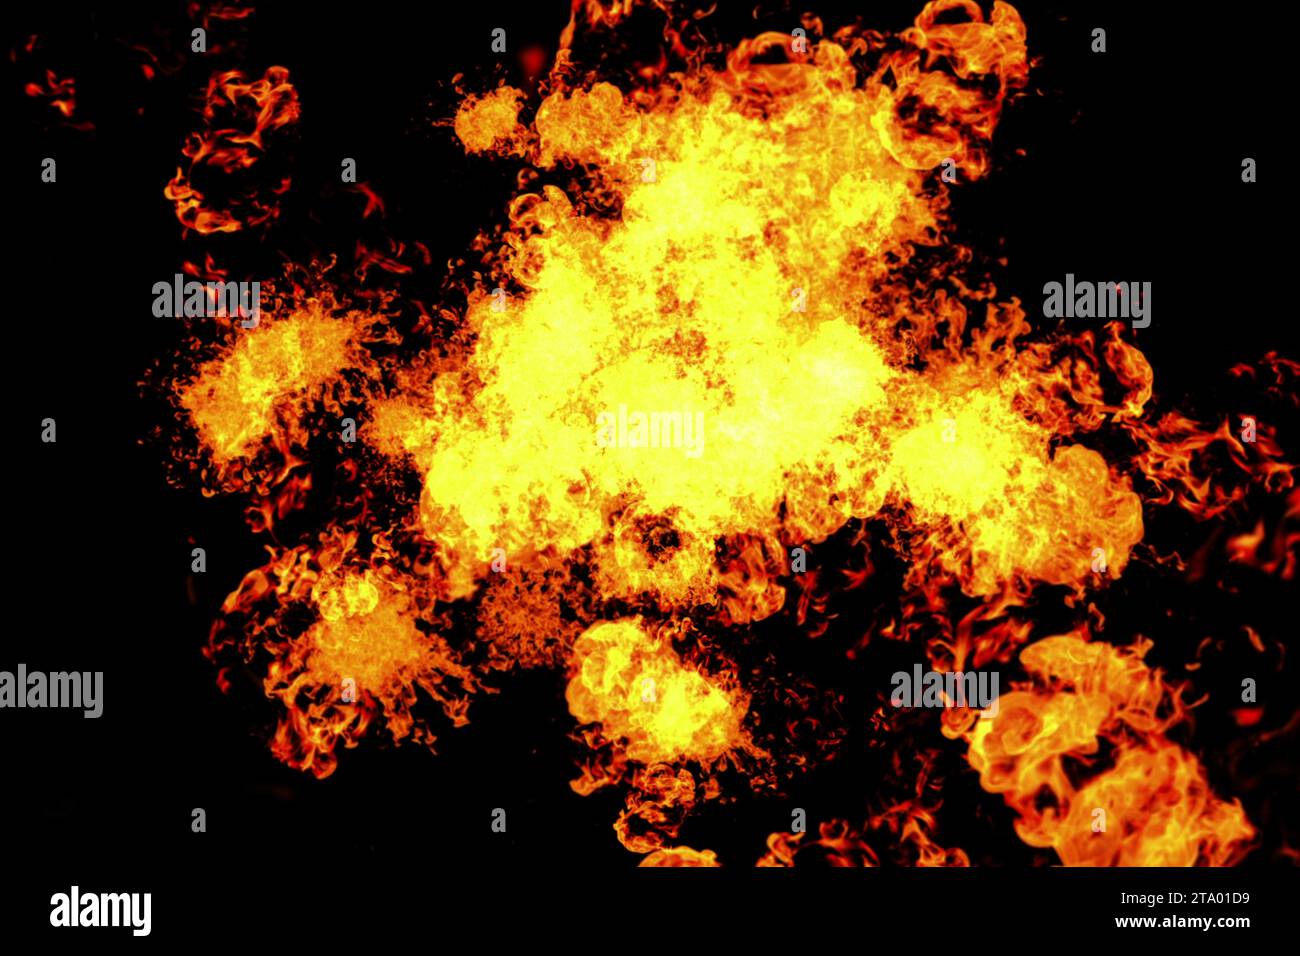 real blast of fire explosion flames burn on black background, flame intro Stock Photo